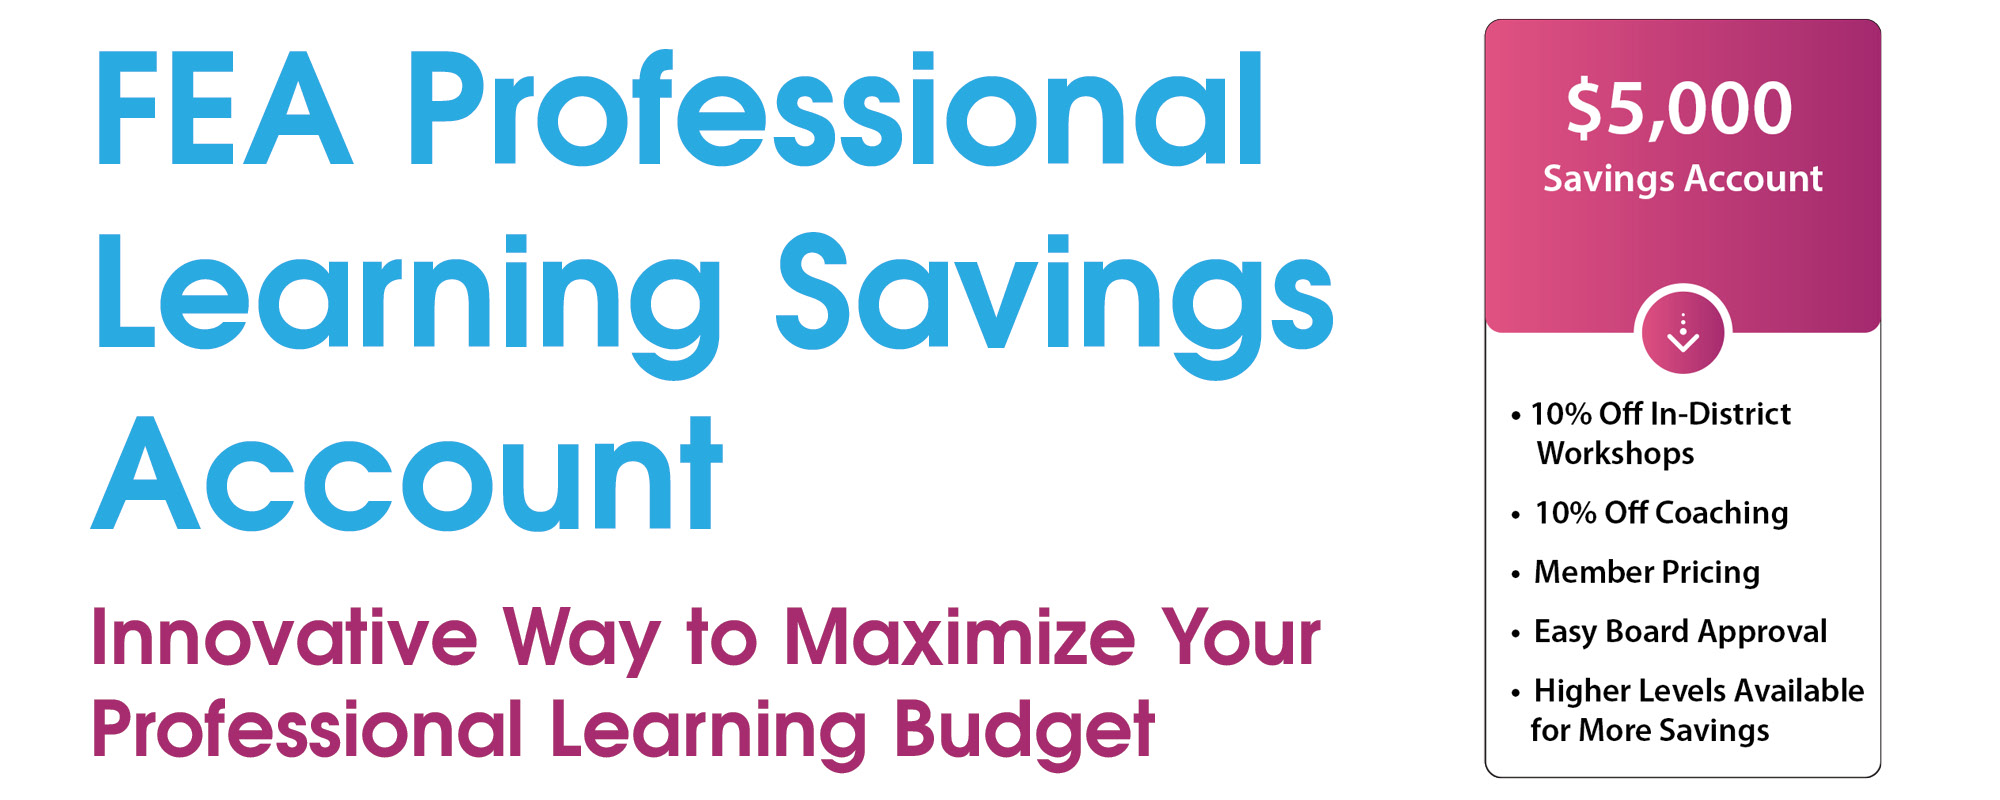 Learn How You Can Maximize Your Professional Learning Budget and Save